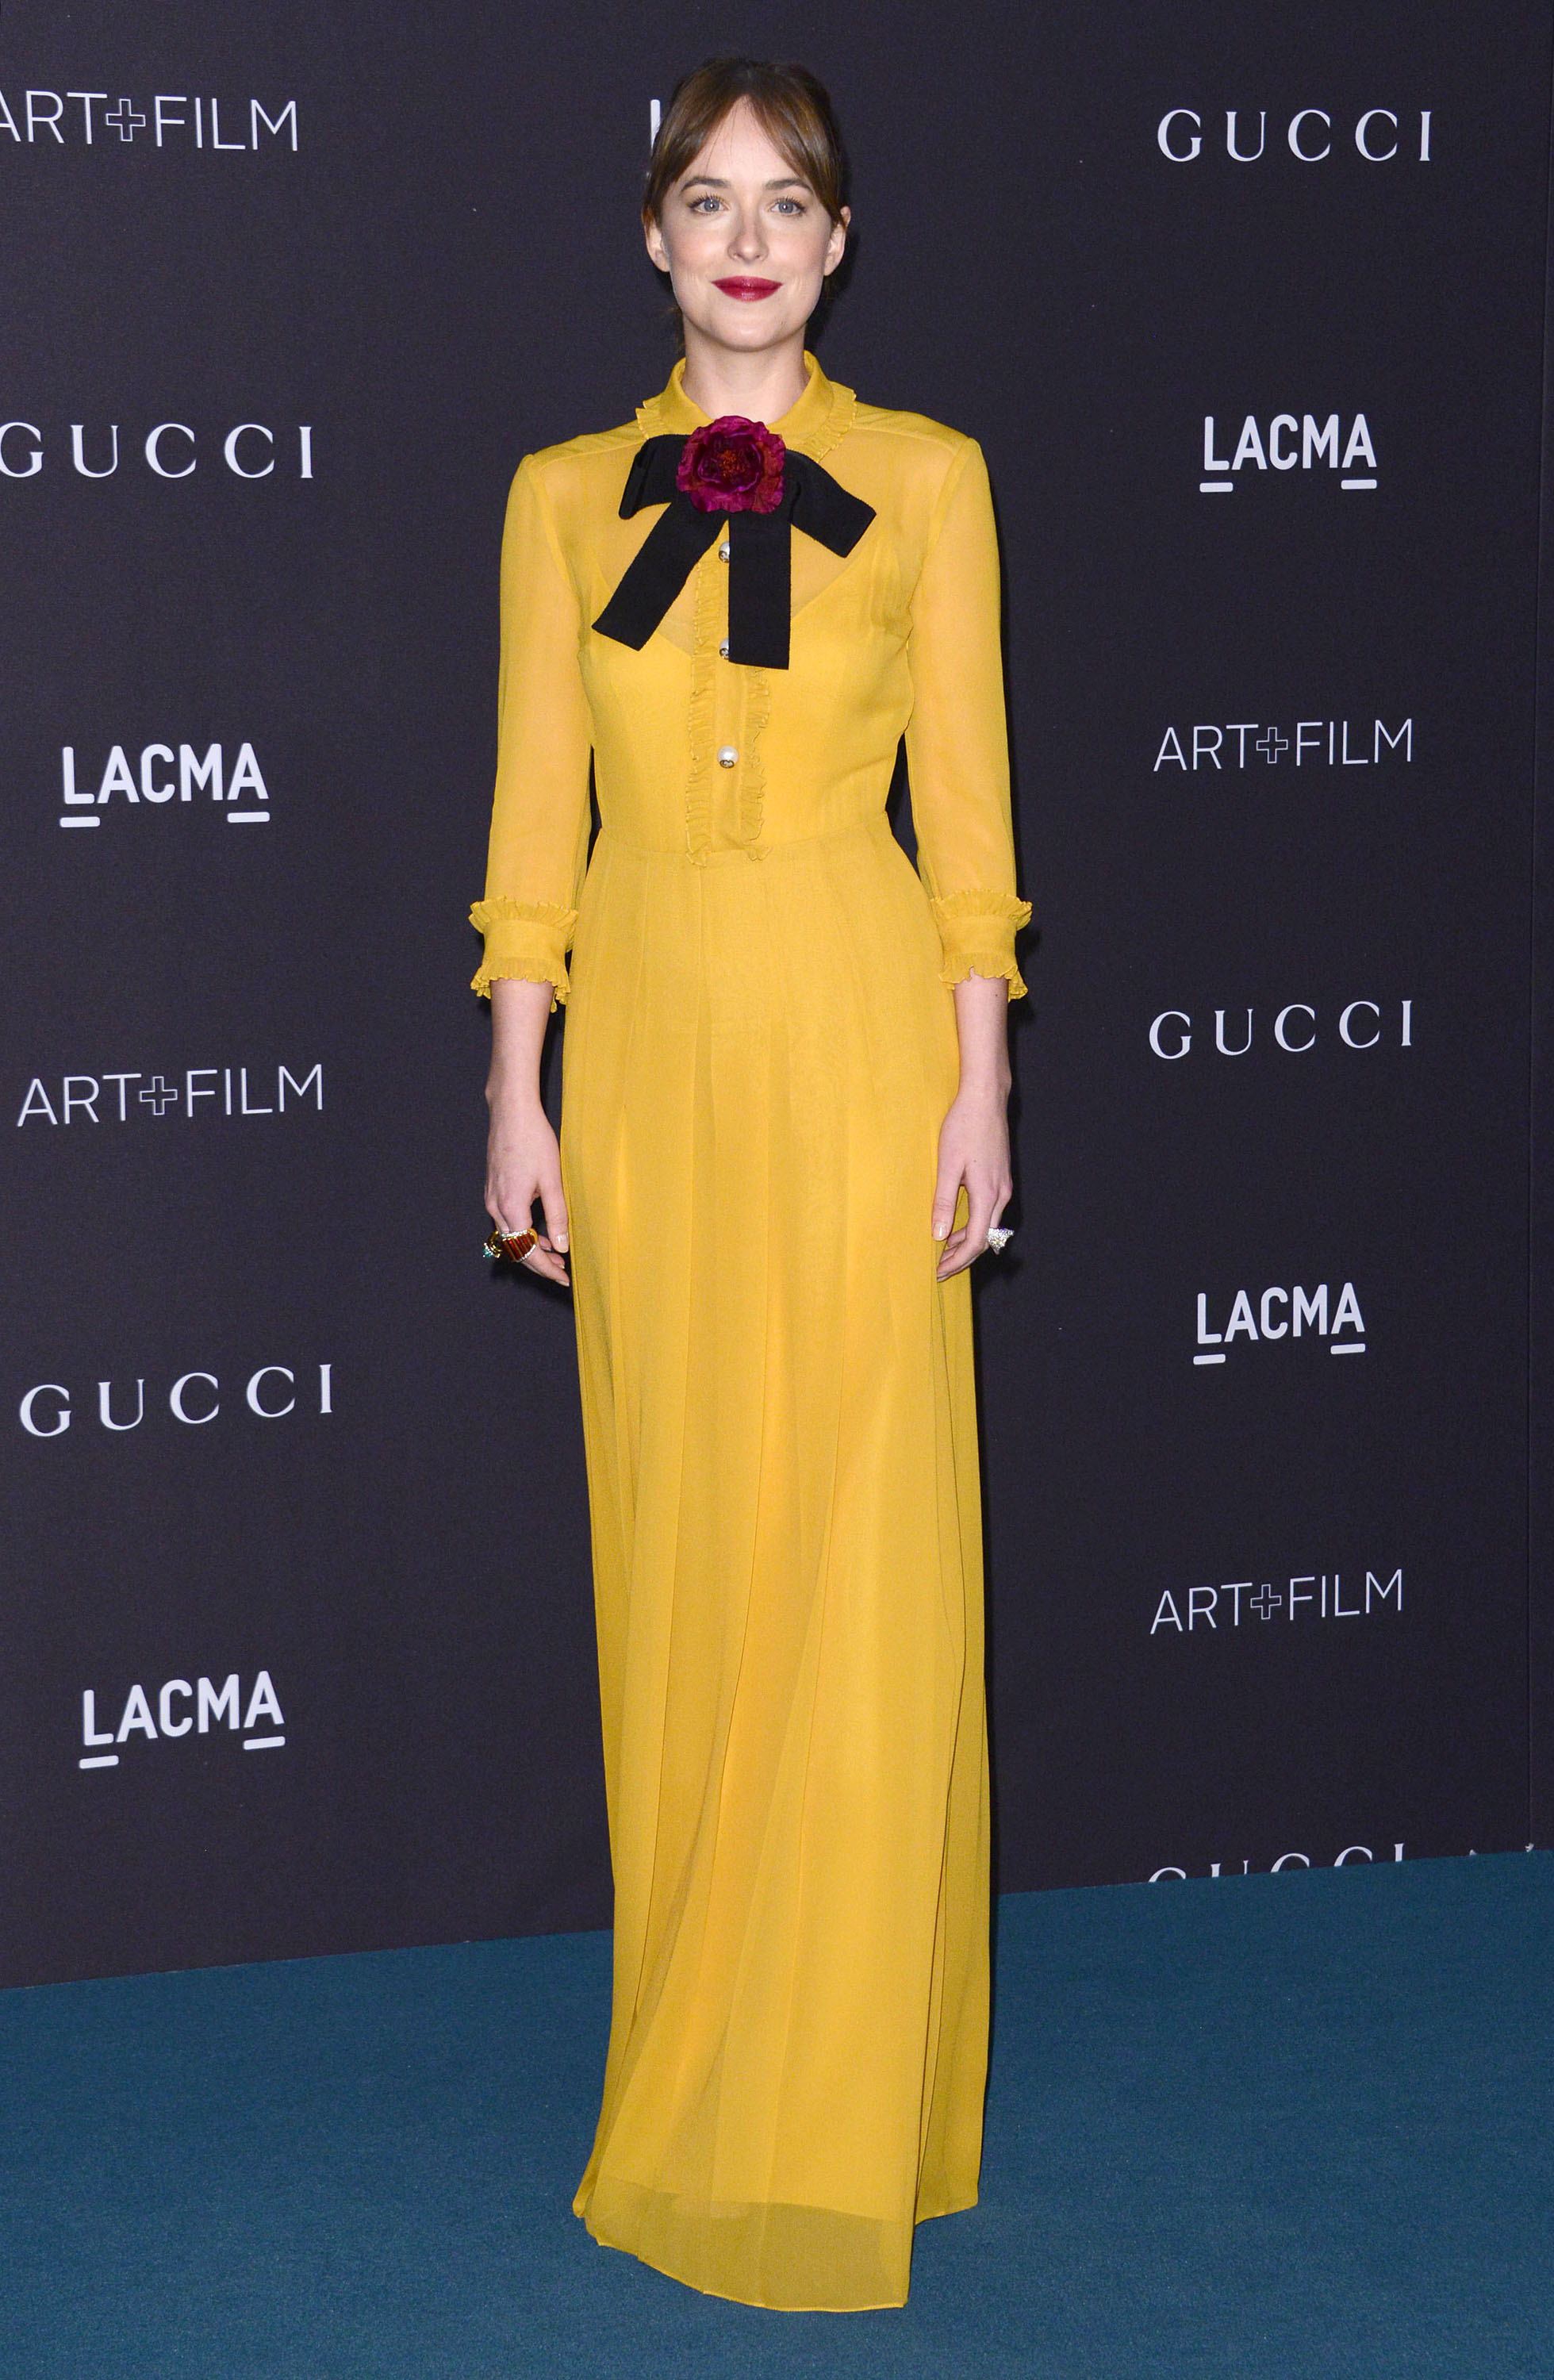 Not As Bad As It Should Be: Dakota Johnson in Gucci